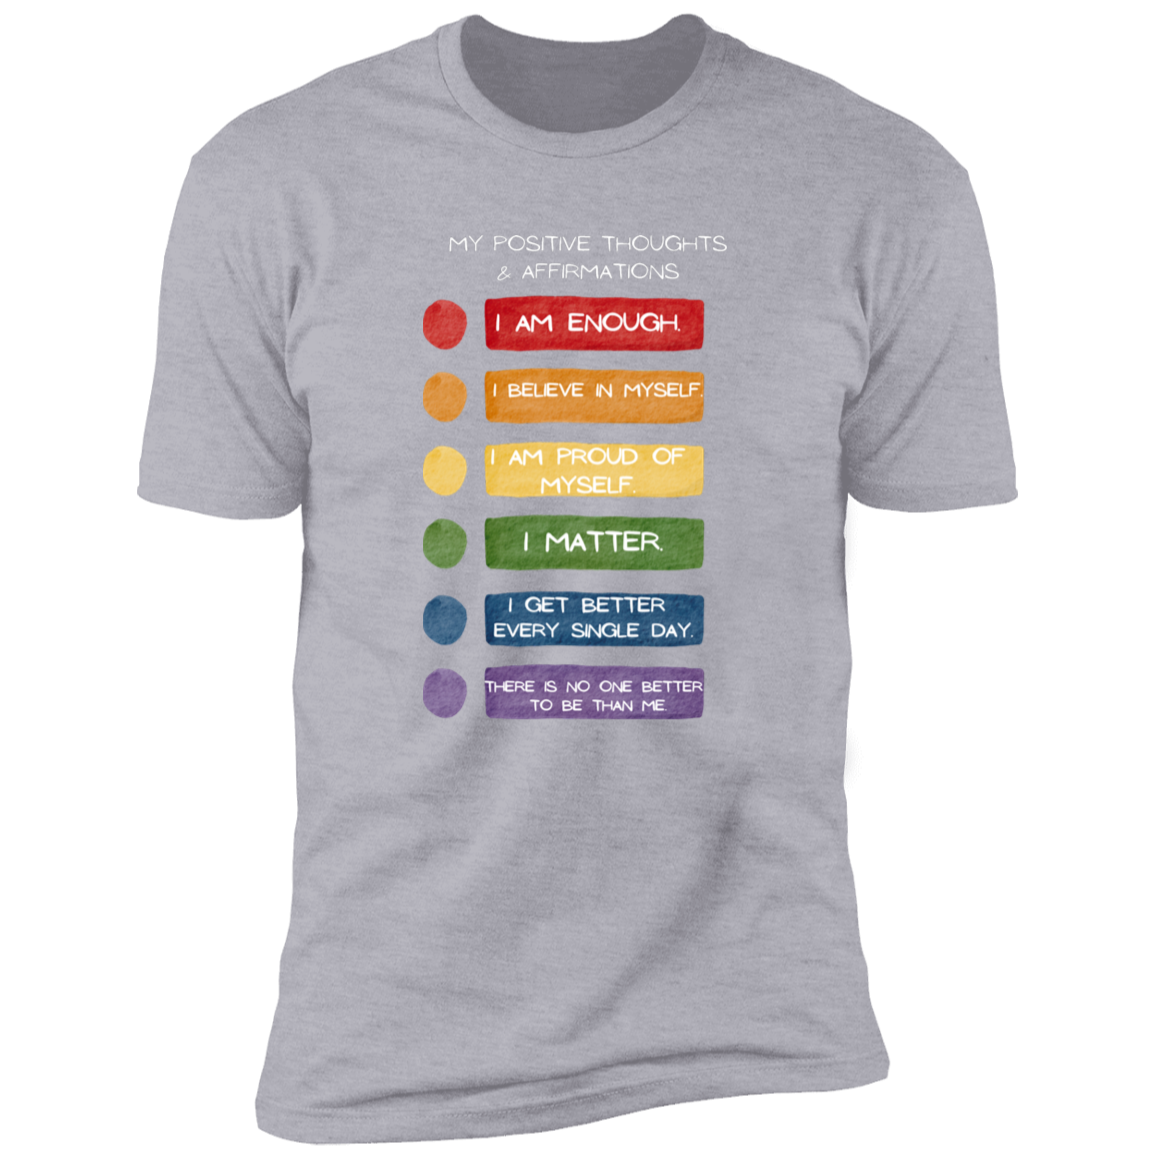 My Positive Thoughts & Affirmations Premium Short Sleeve T-Shirt